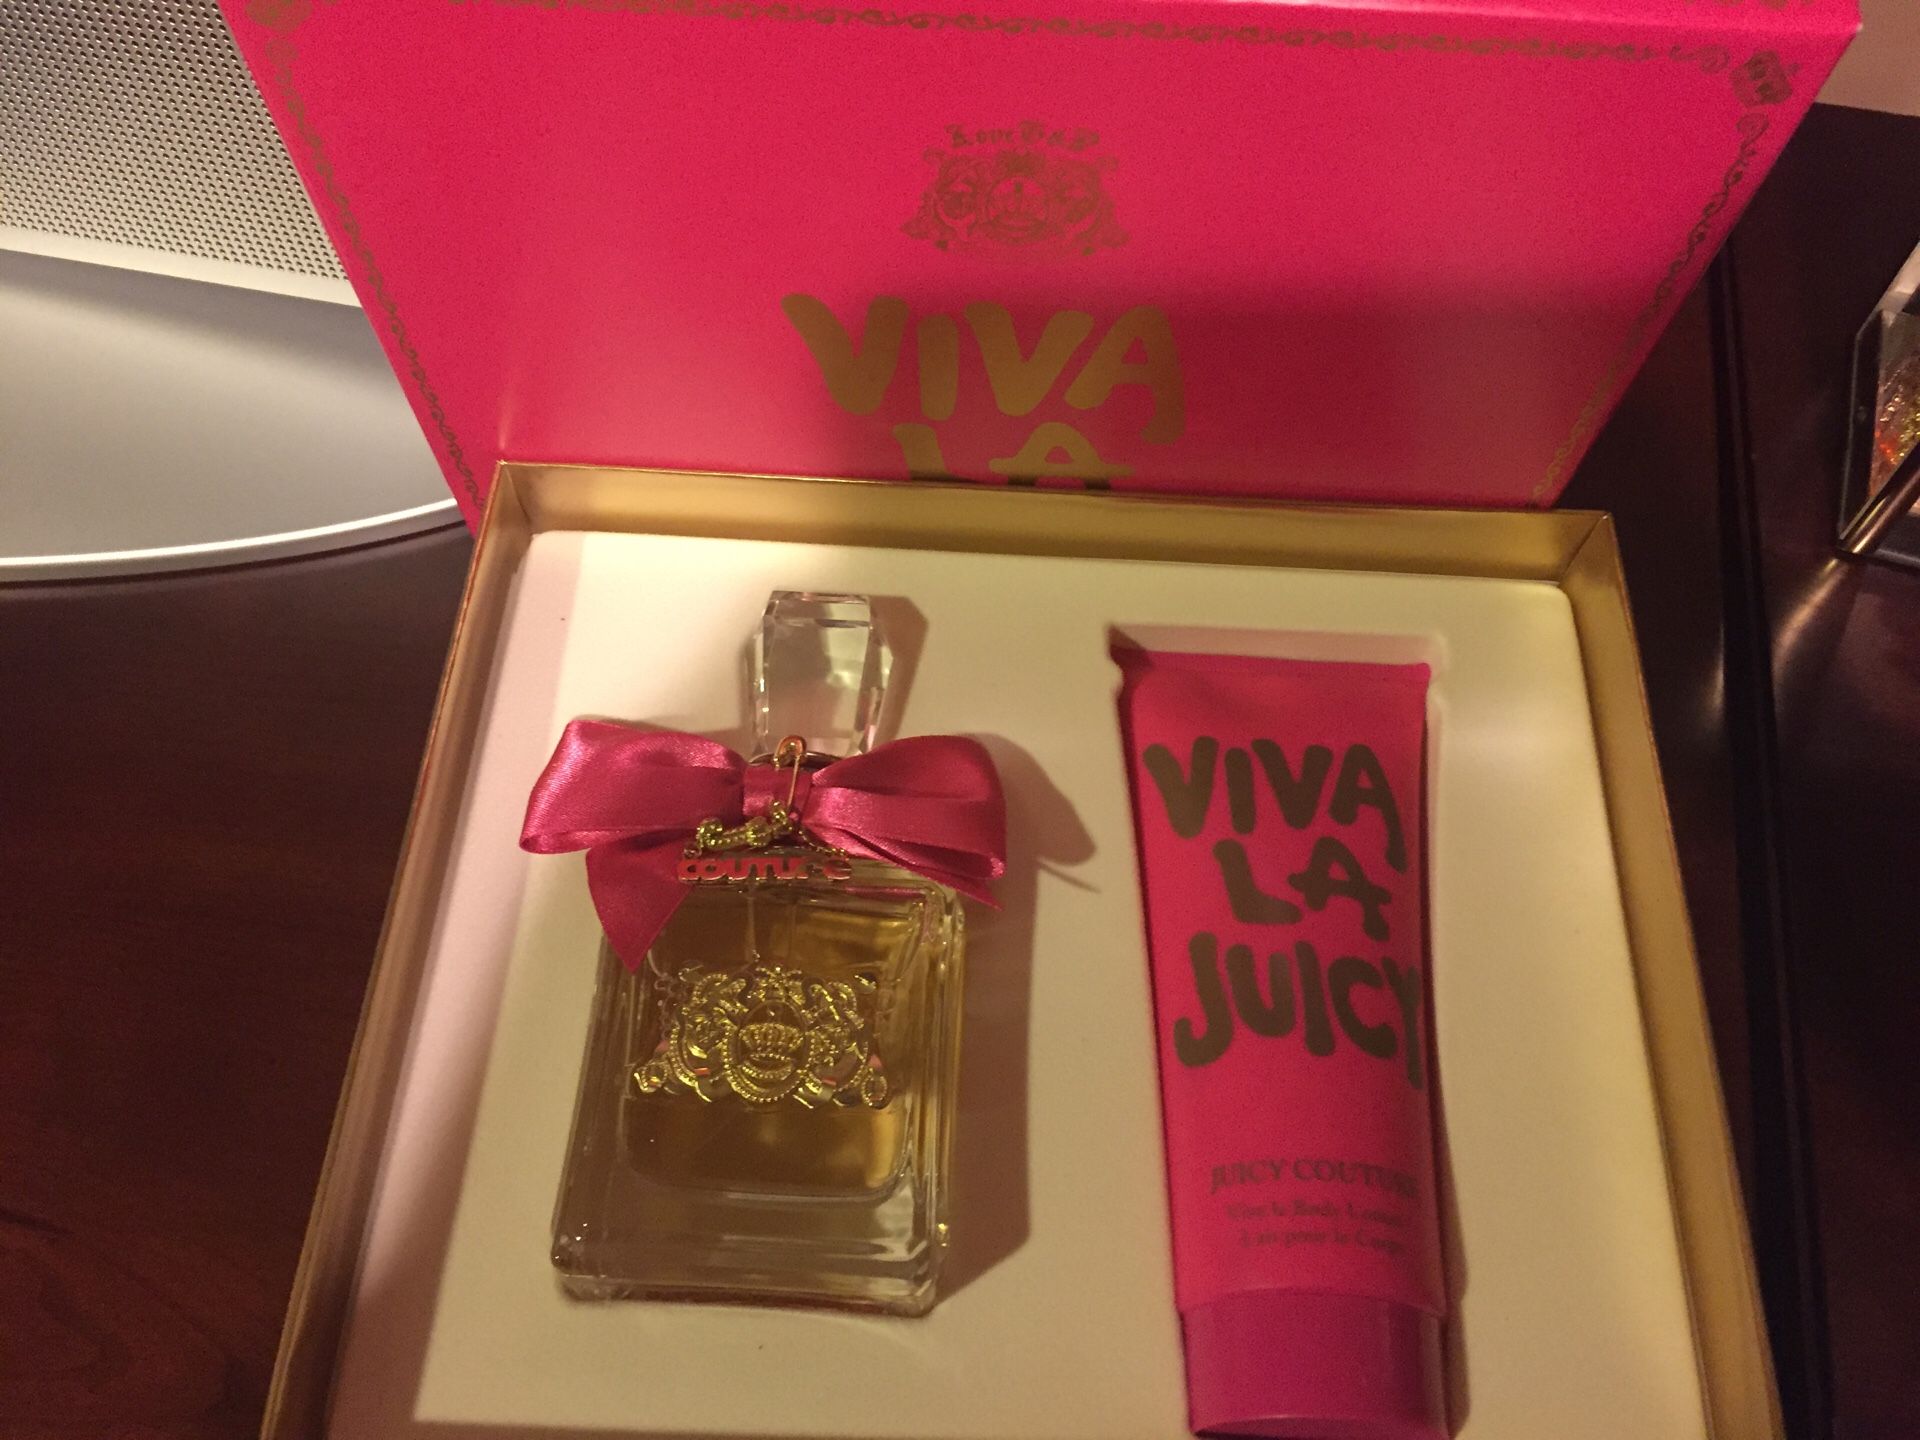 Brand new juicy couture set with lotion and 3.4 oz bottle perfume